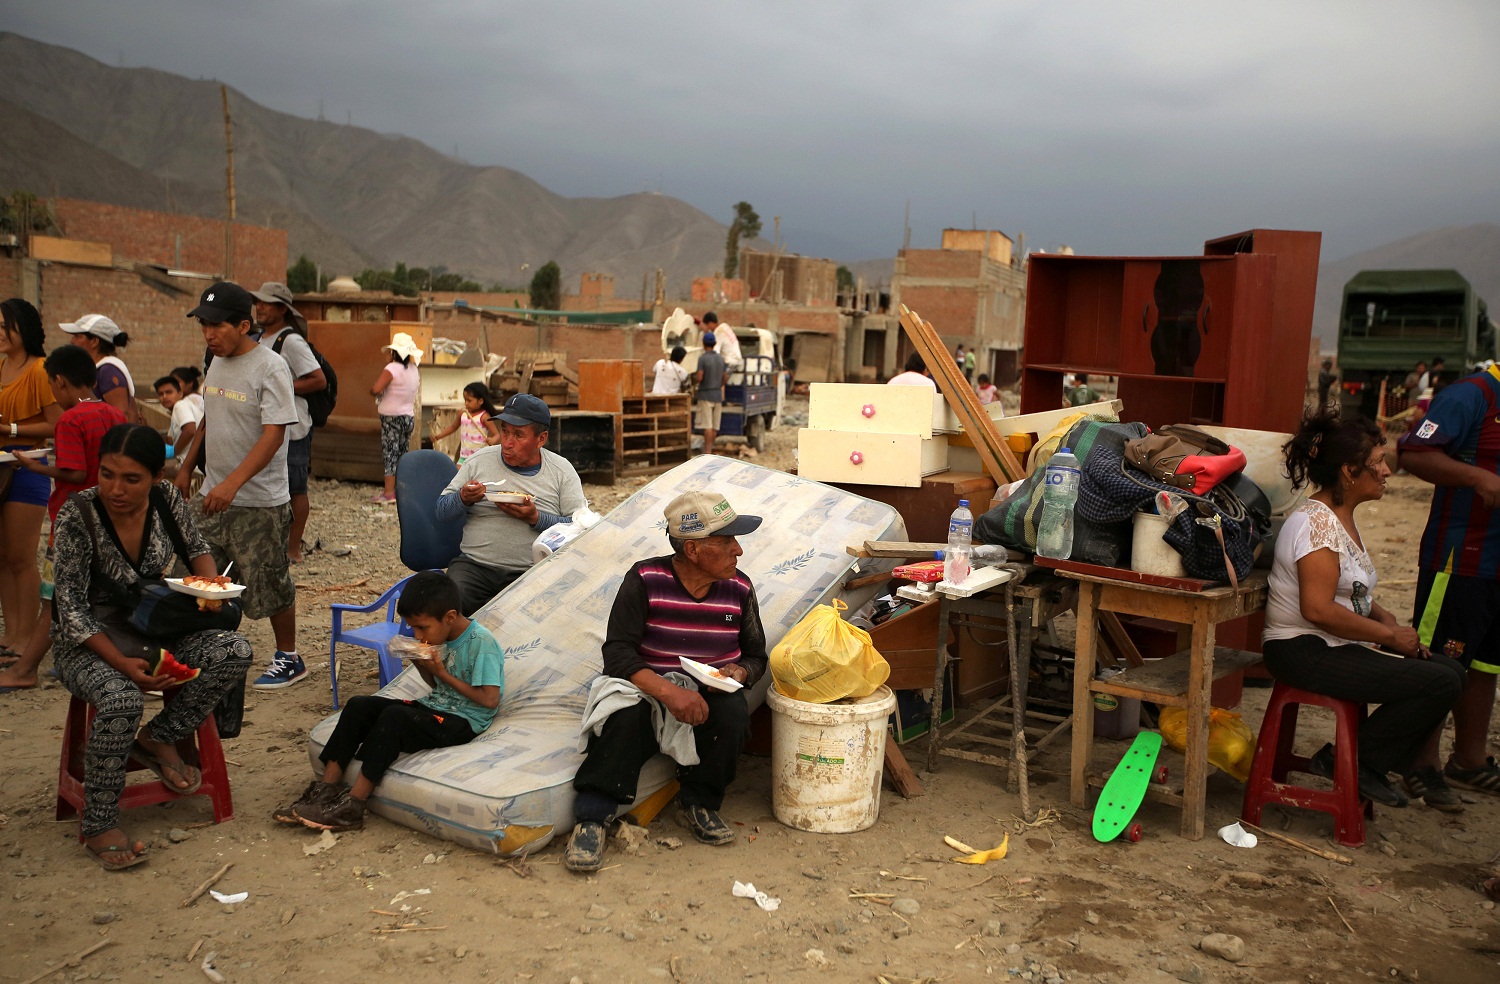 Residents rest next to their belongings, after rivers breached their banks due to torrential rains, causing flooding and widespread destruction in Huachipa, Lima, Peru, March 18, 2017. REUTERS/Mariana Bazo